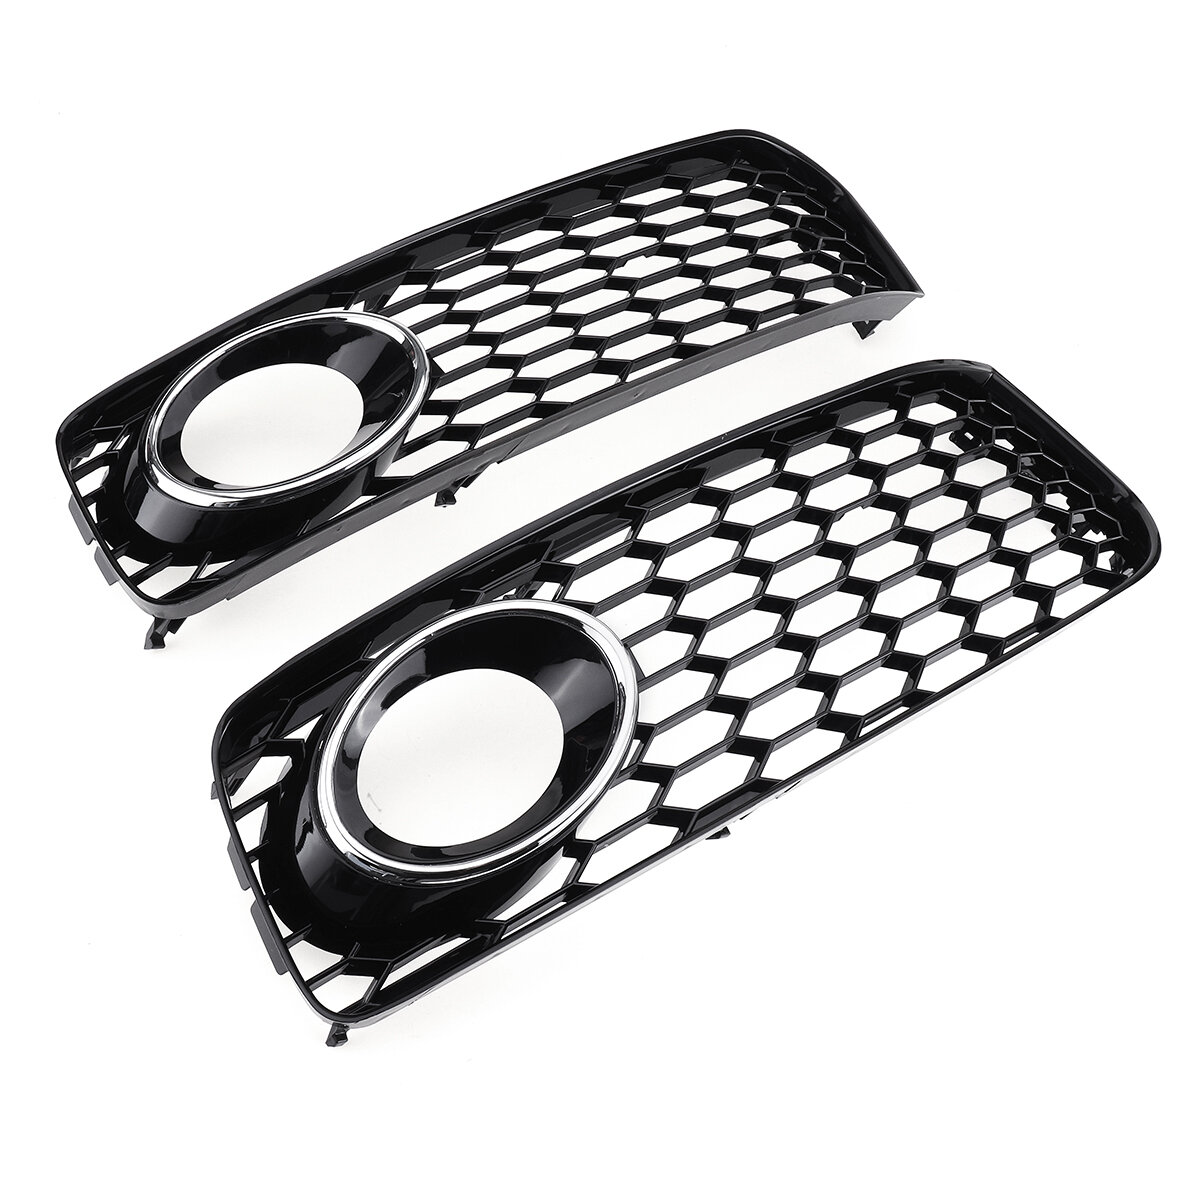 Mistlamp Lamp Cover Grille Grill Honingraat Hex Chrome Zilver Voor Audi A5 S-Line S5 B8 RS5 2008-201